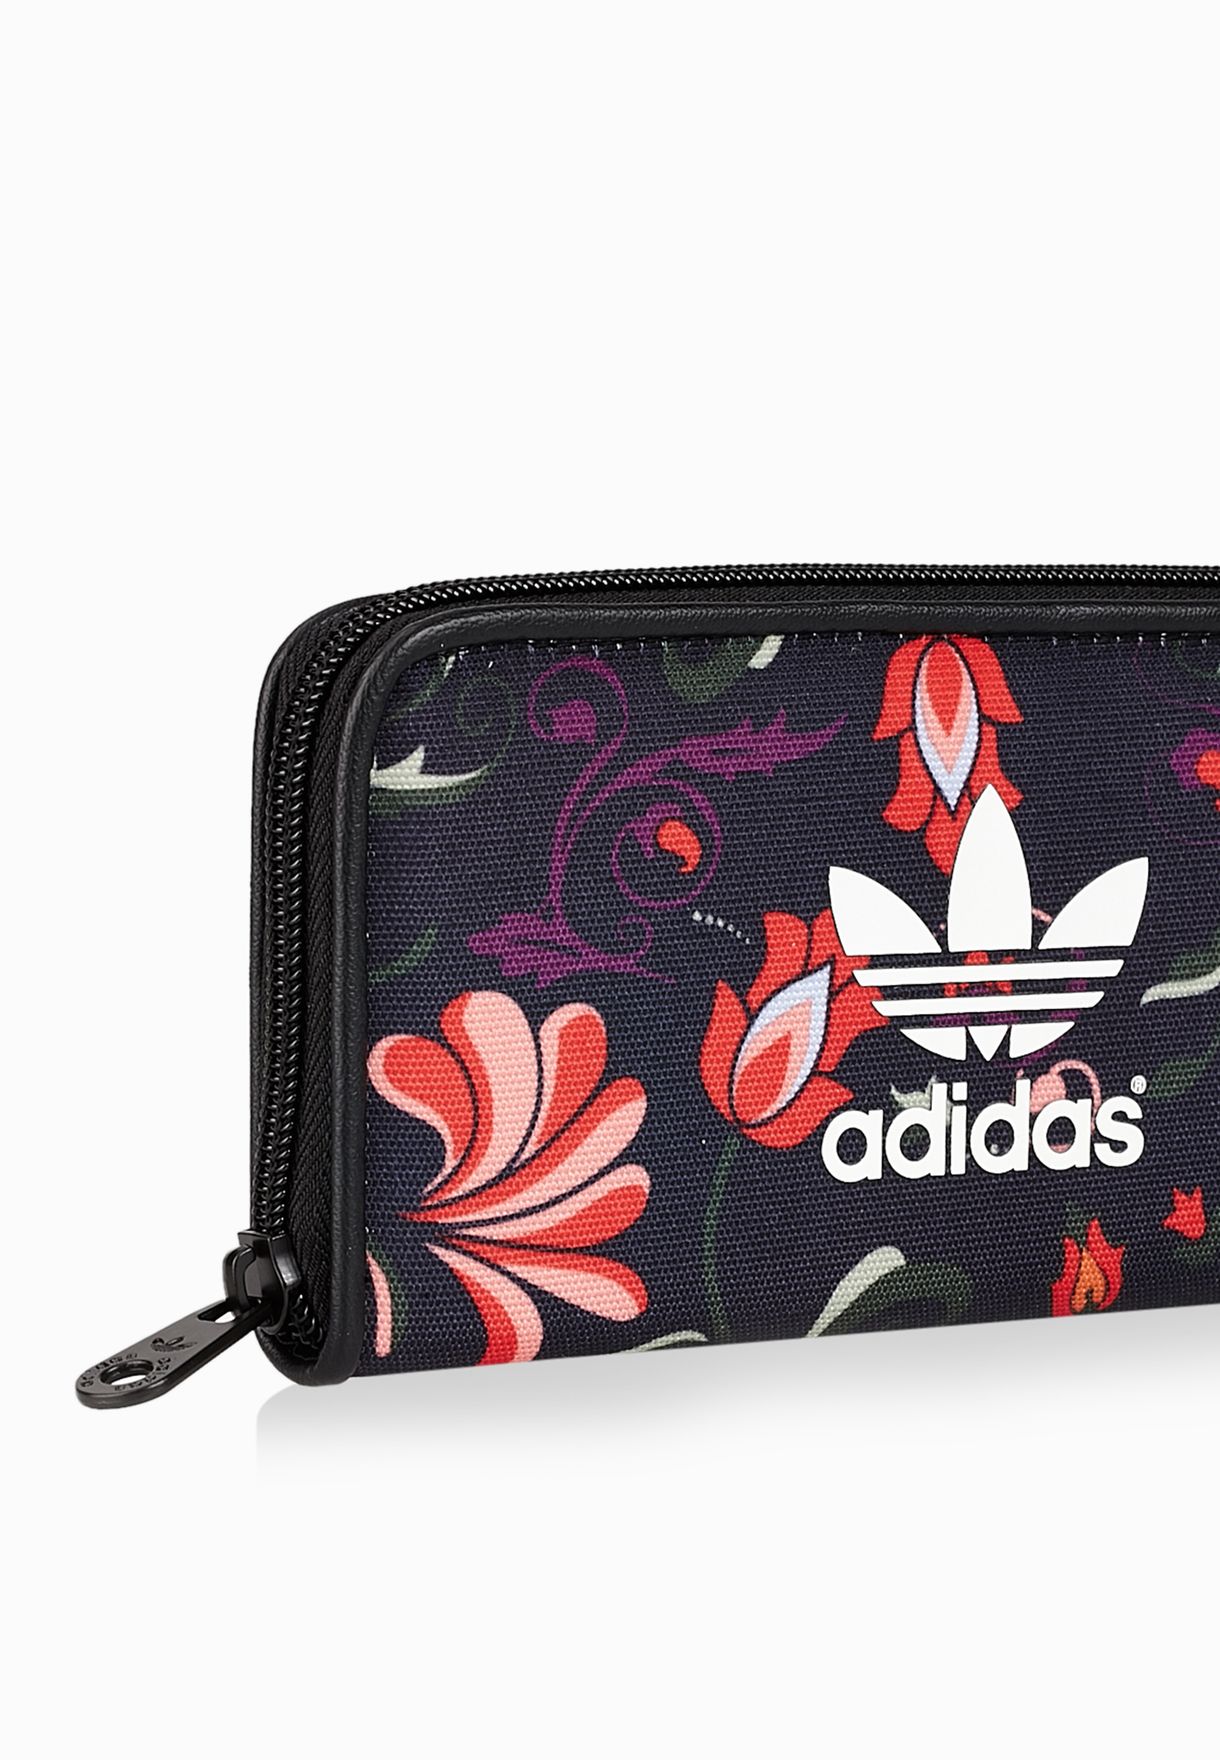 adidas wallet moscow